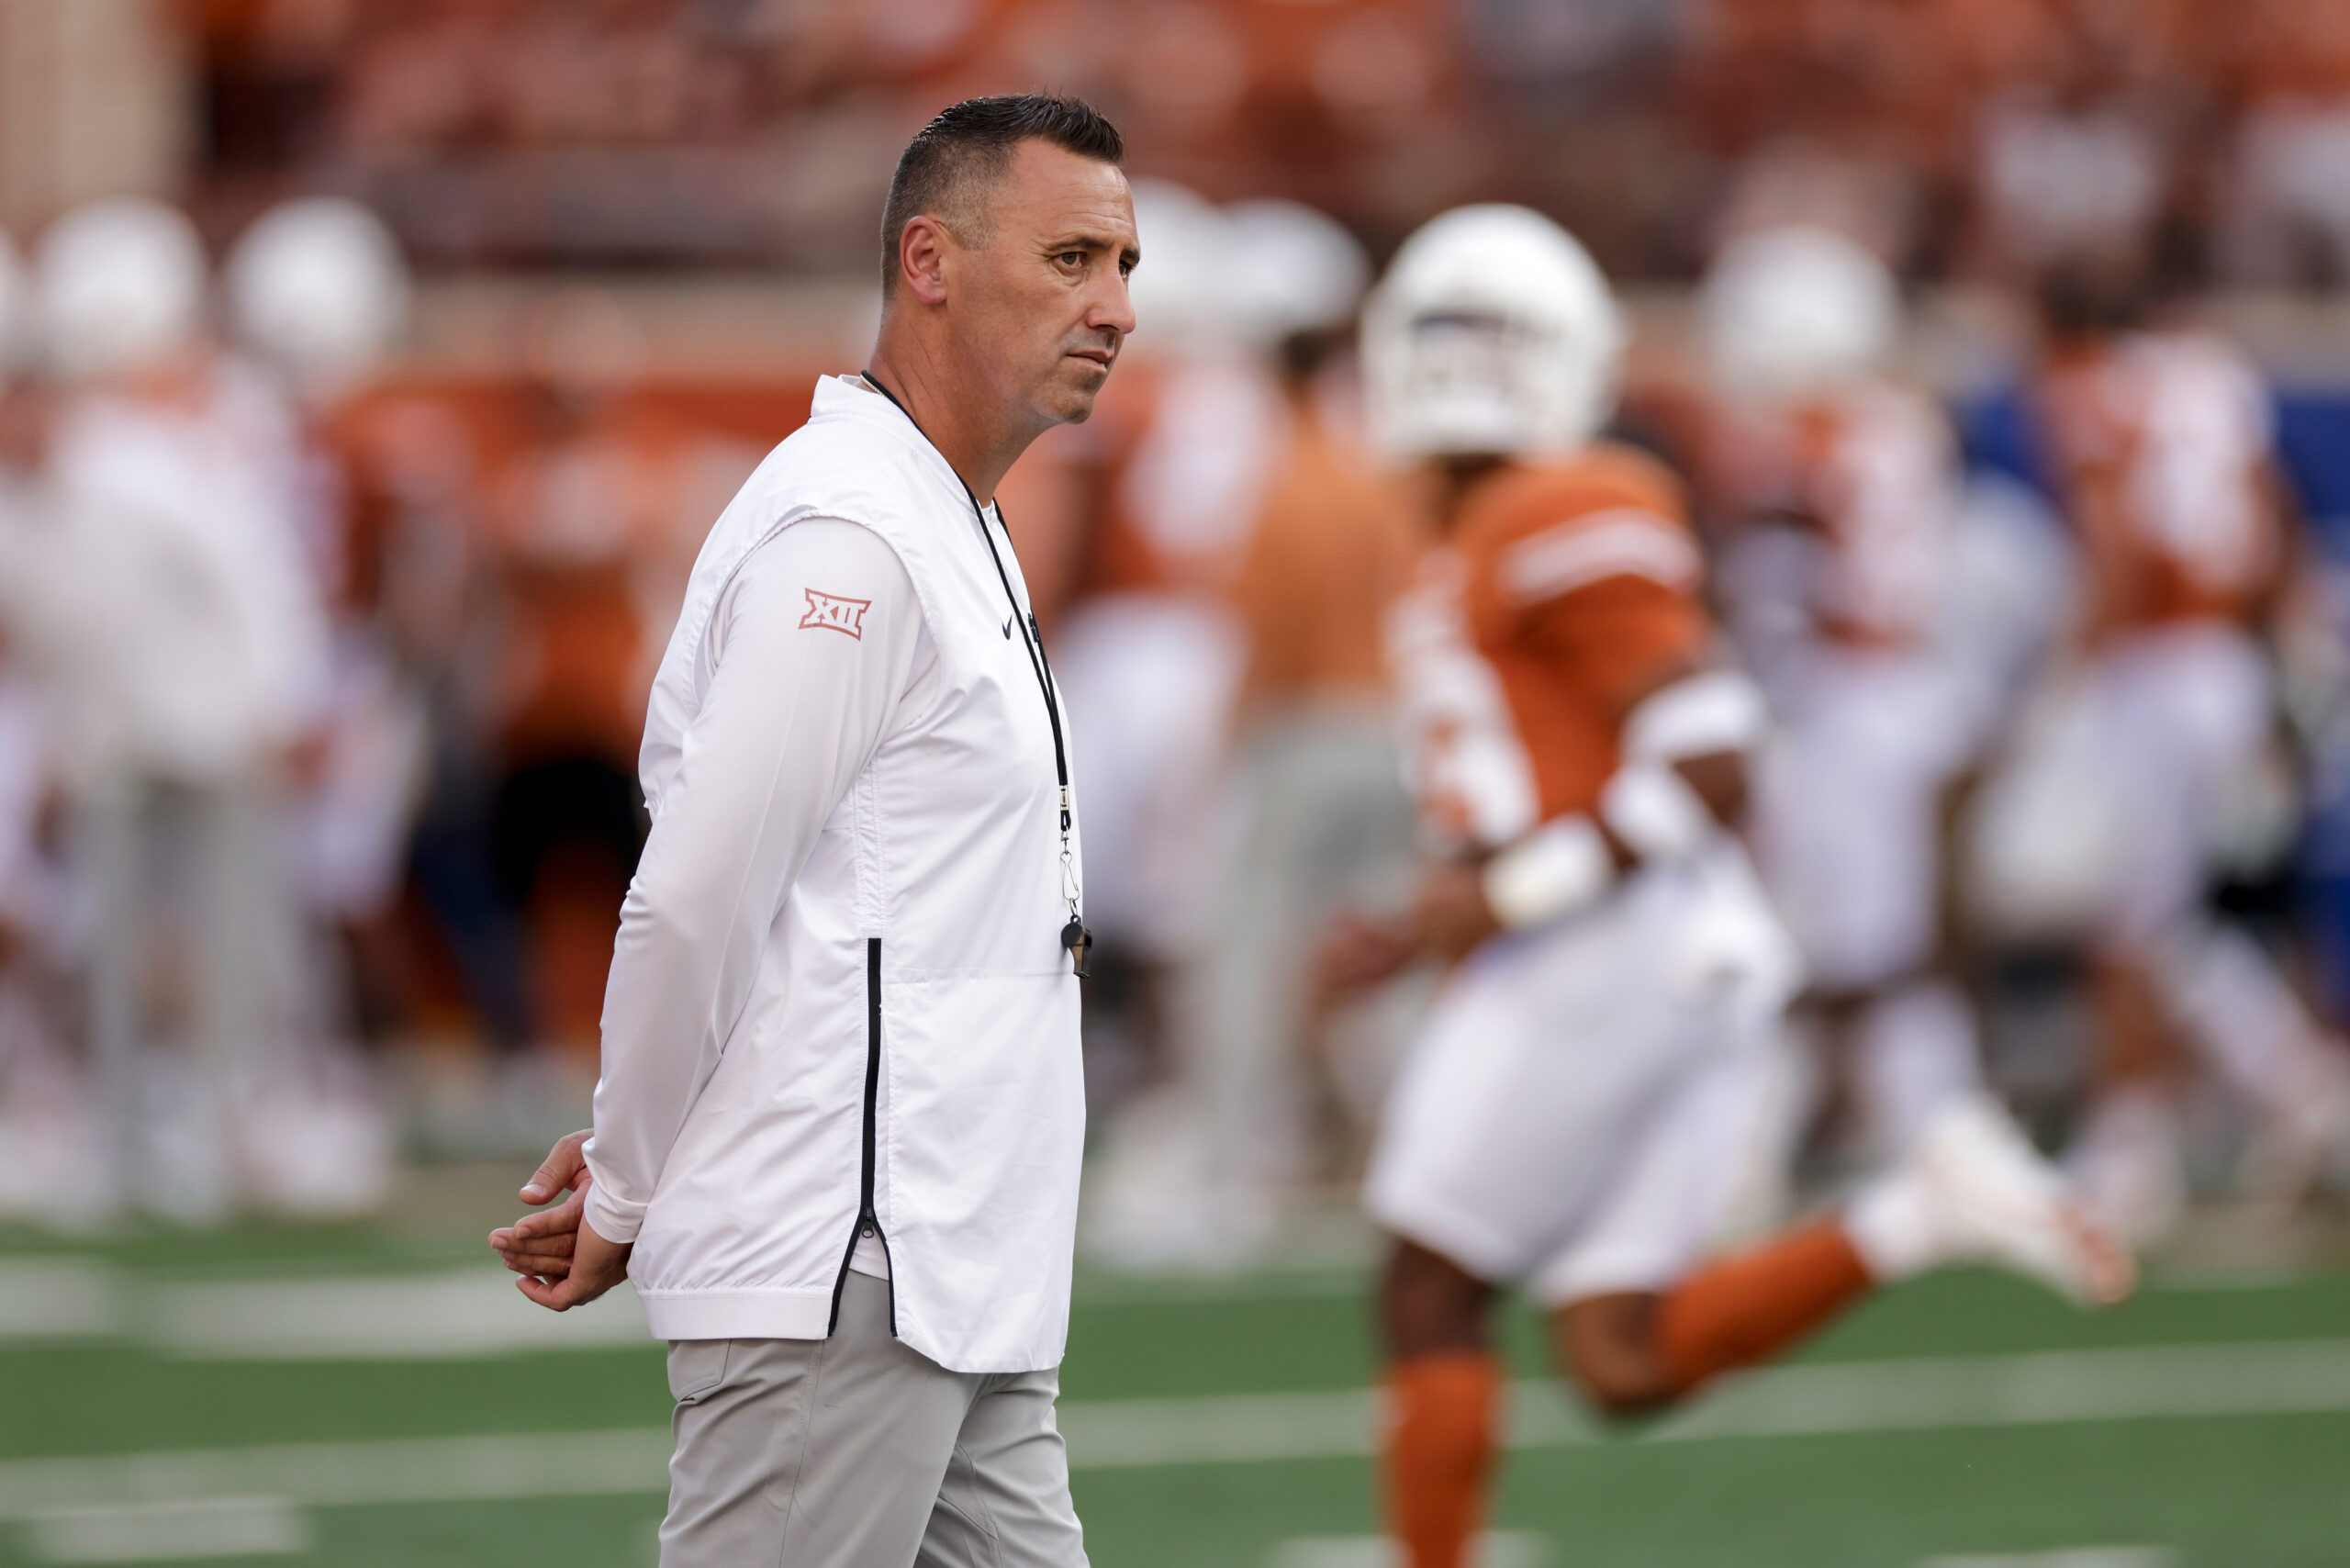 Texas fans and media react to a 16-3 first half lead against Rice